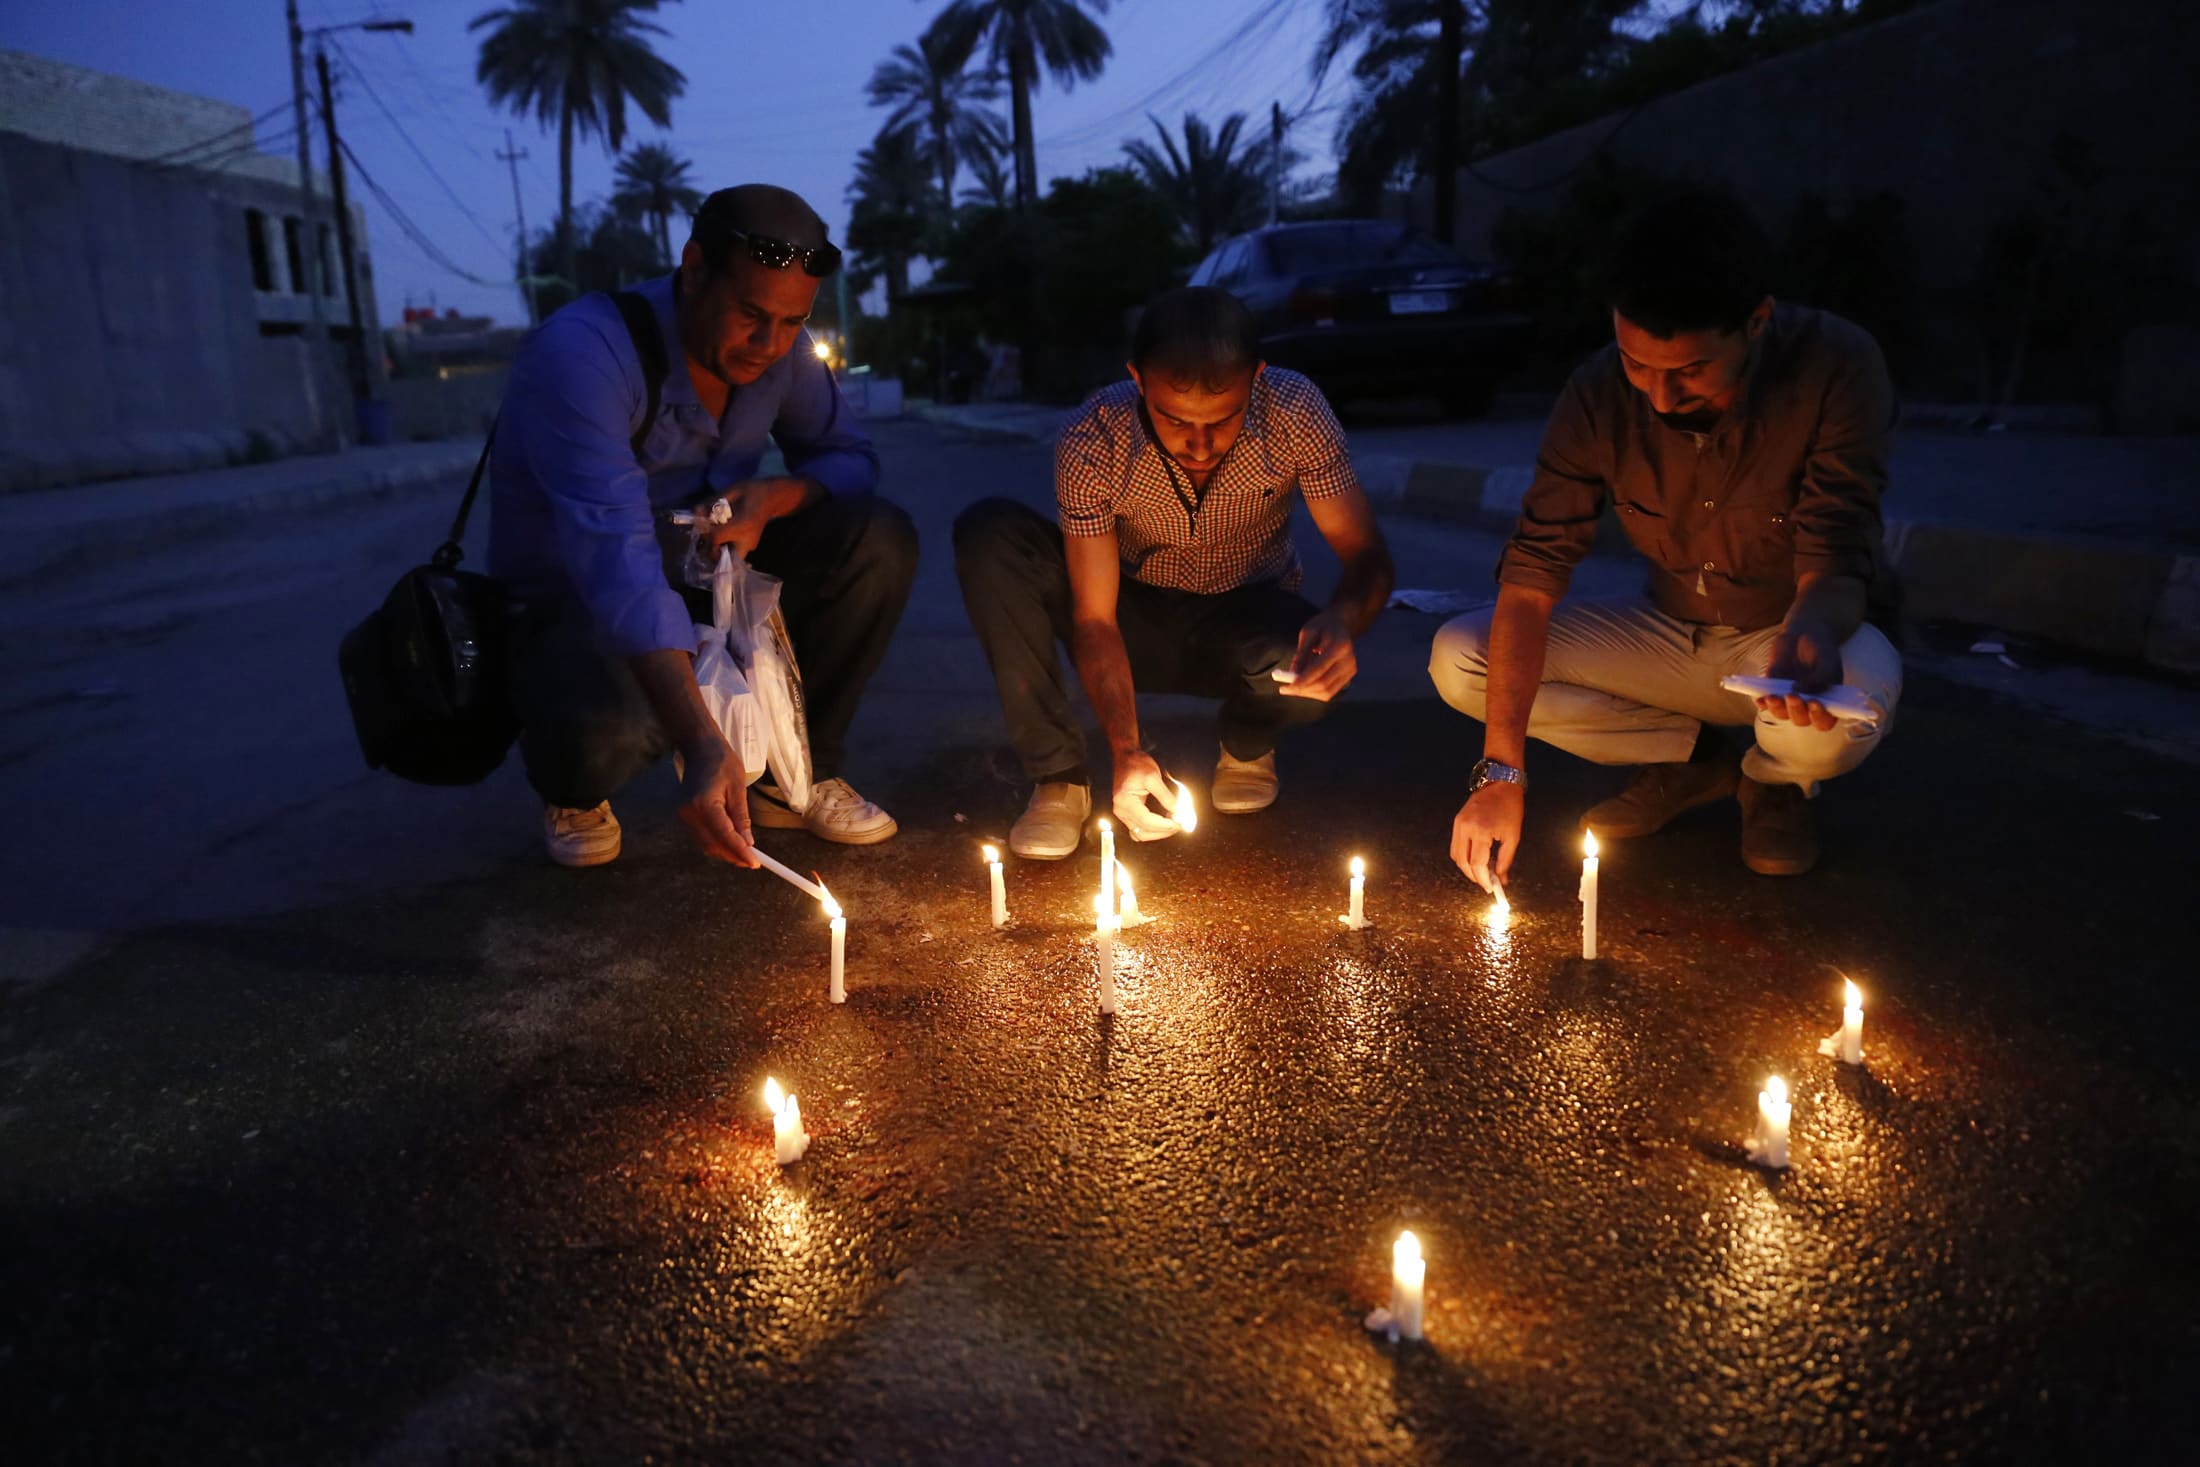 Iraqi journalists light candles at the site where Mohammed Badawi, the Baghdad bureau chief of Radio Free Iraq, was shot dead, 22 March 2014, REUTERS/Thaier al-Sudani